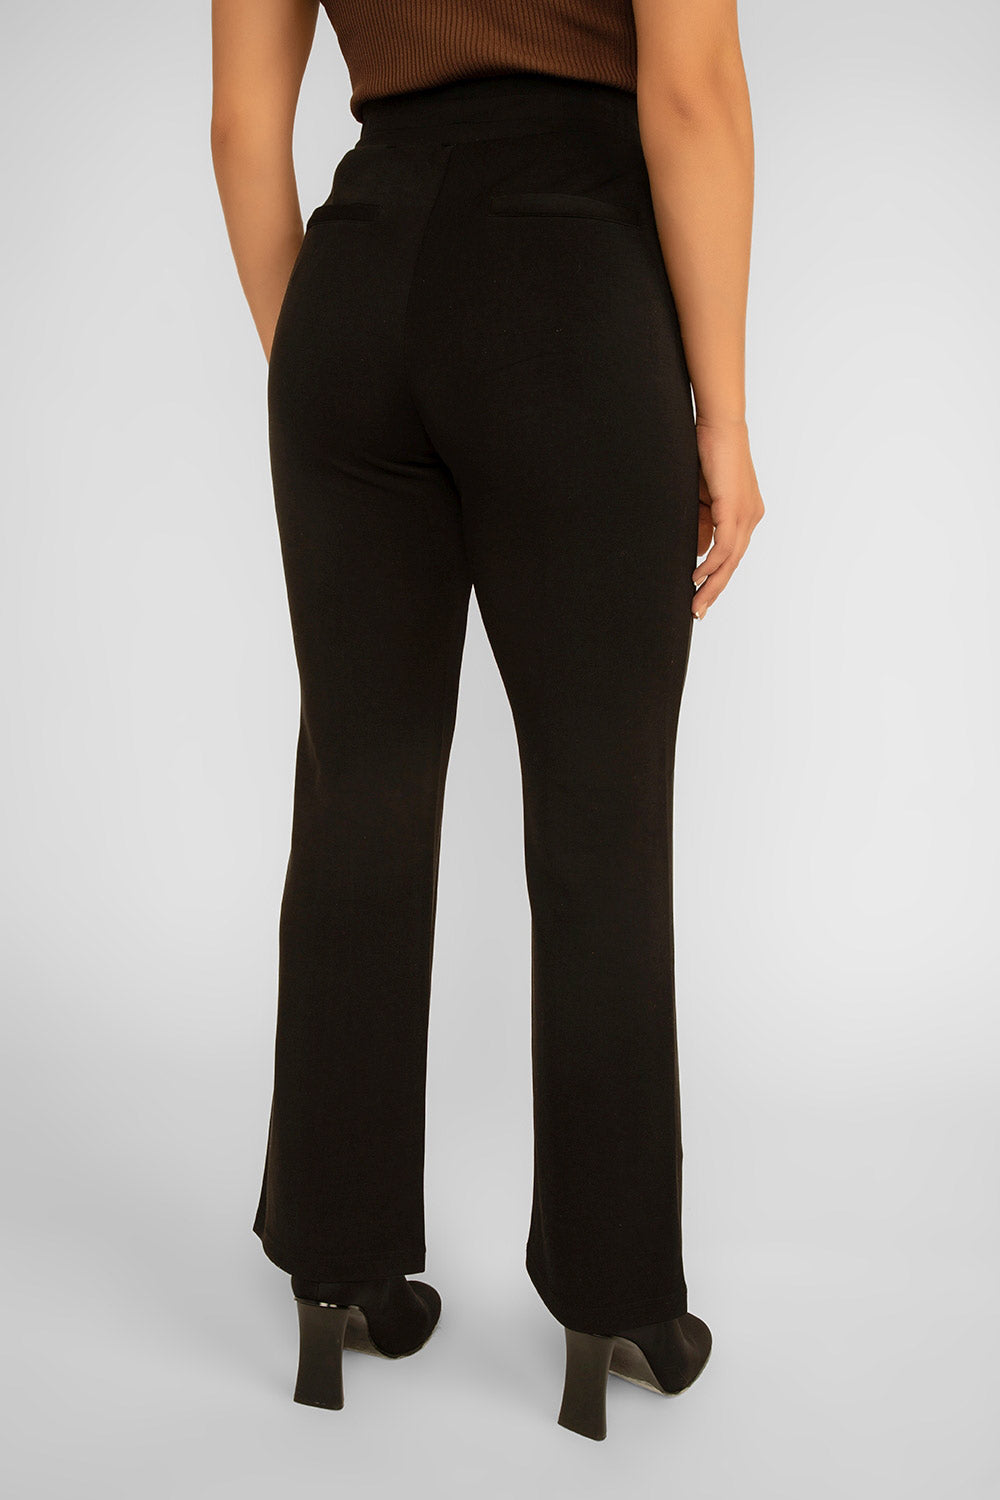 Women's Clothing ESQUALO (F2305504) Flare Modal Trousers in BLACK